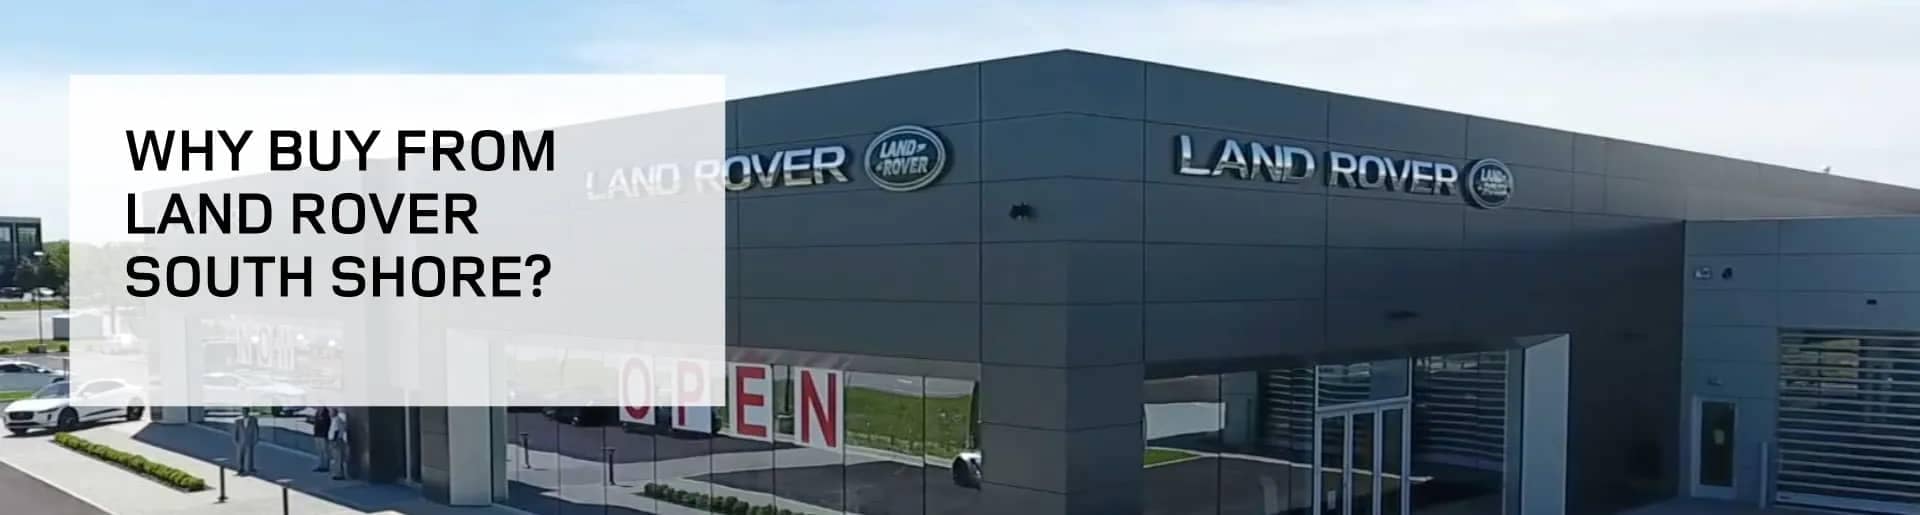 Land Rover building